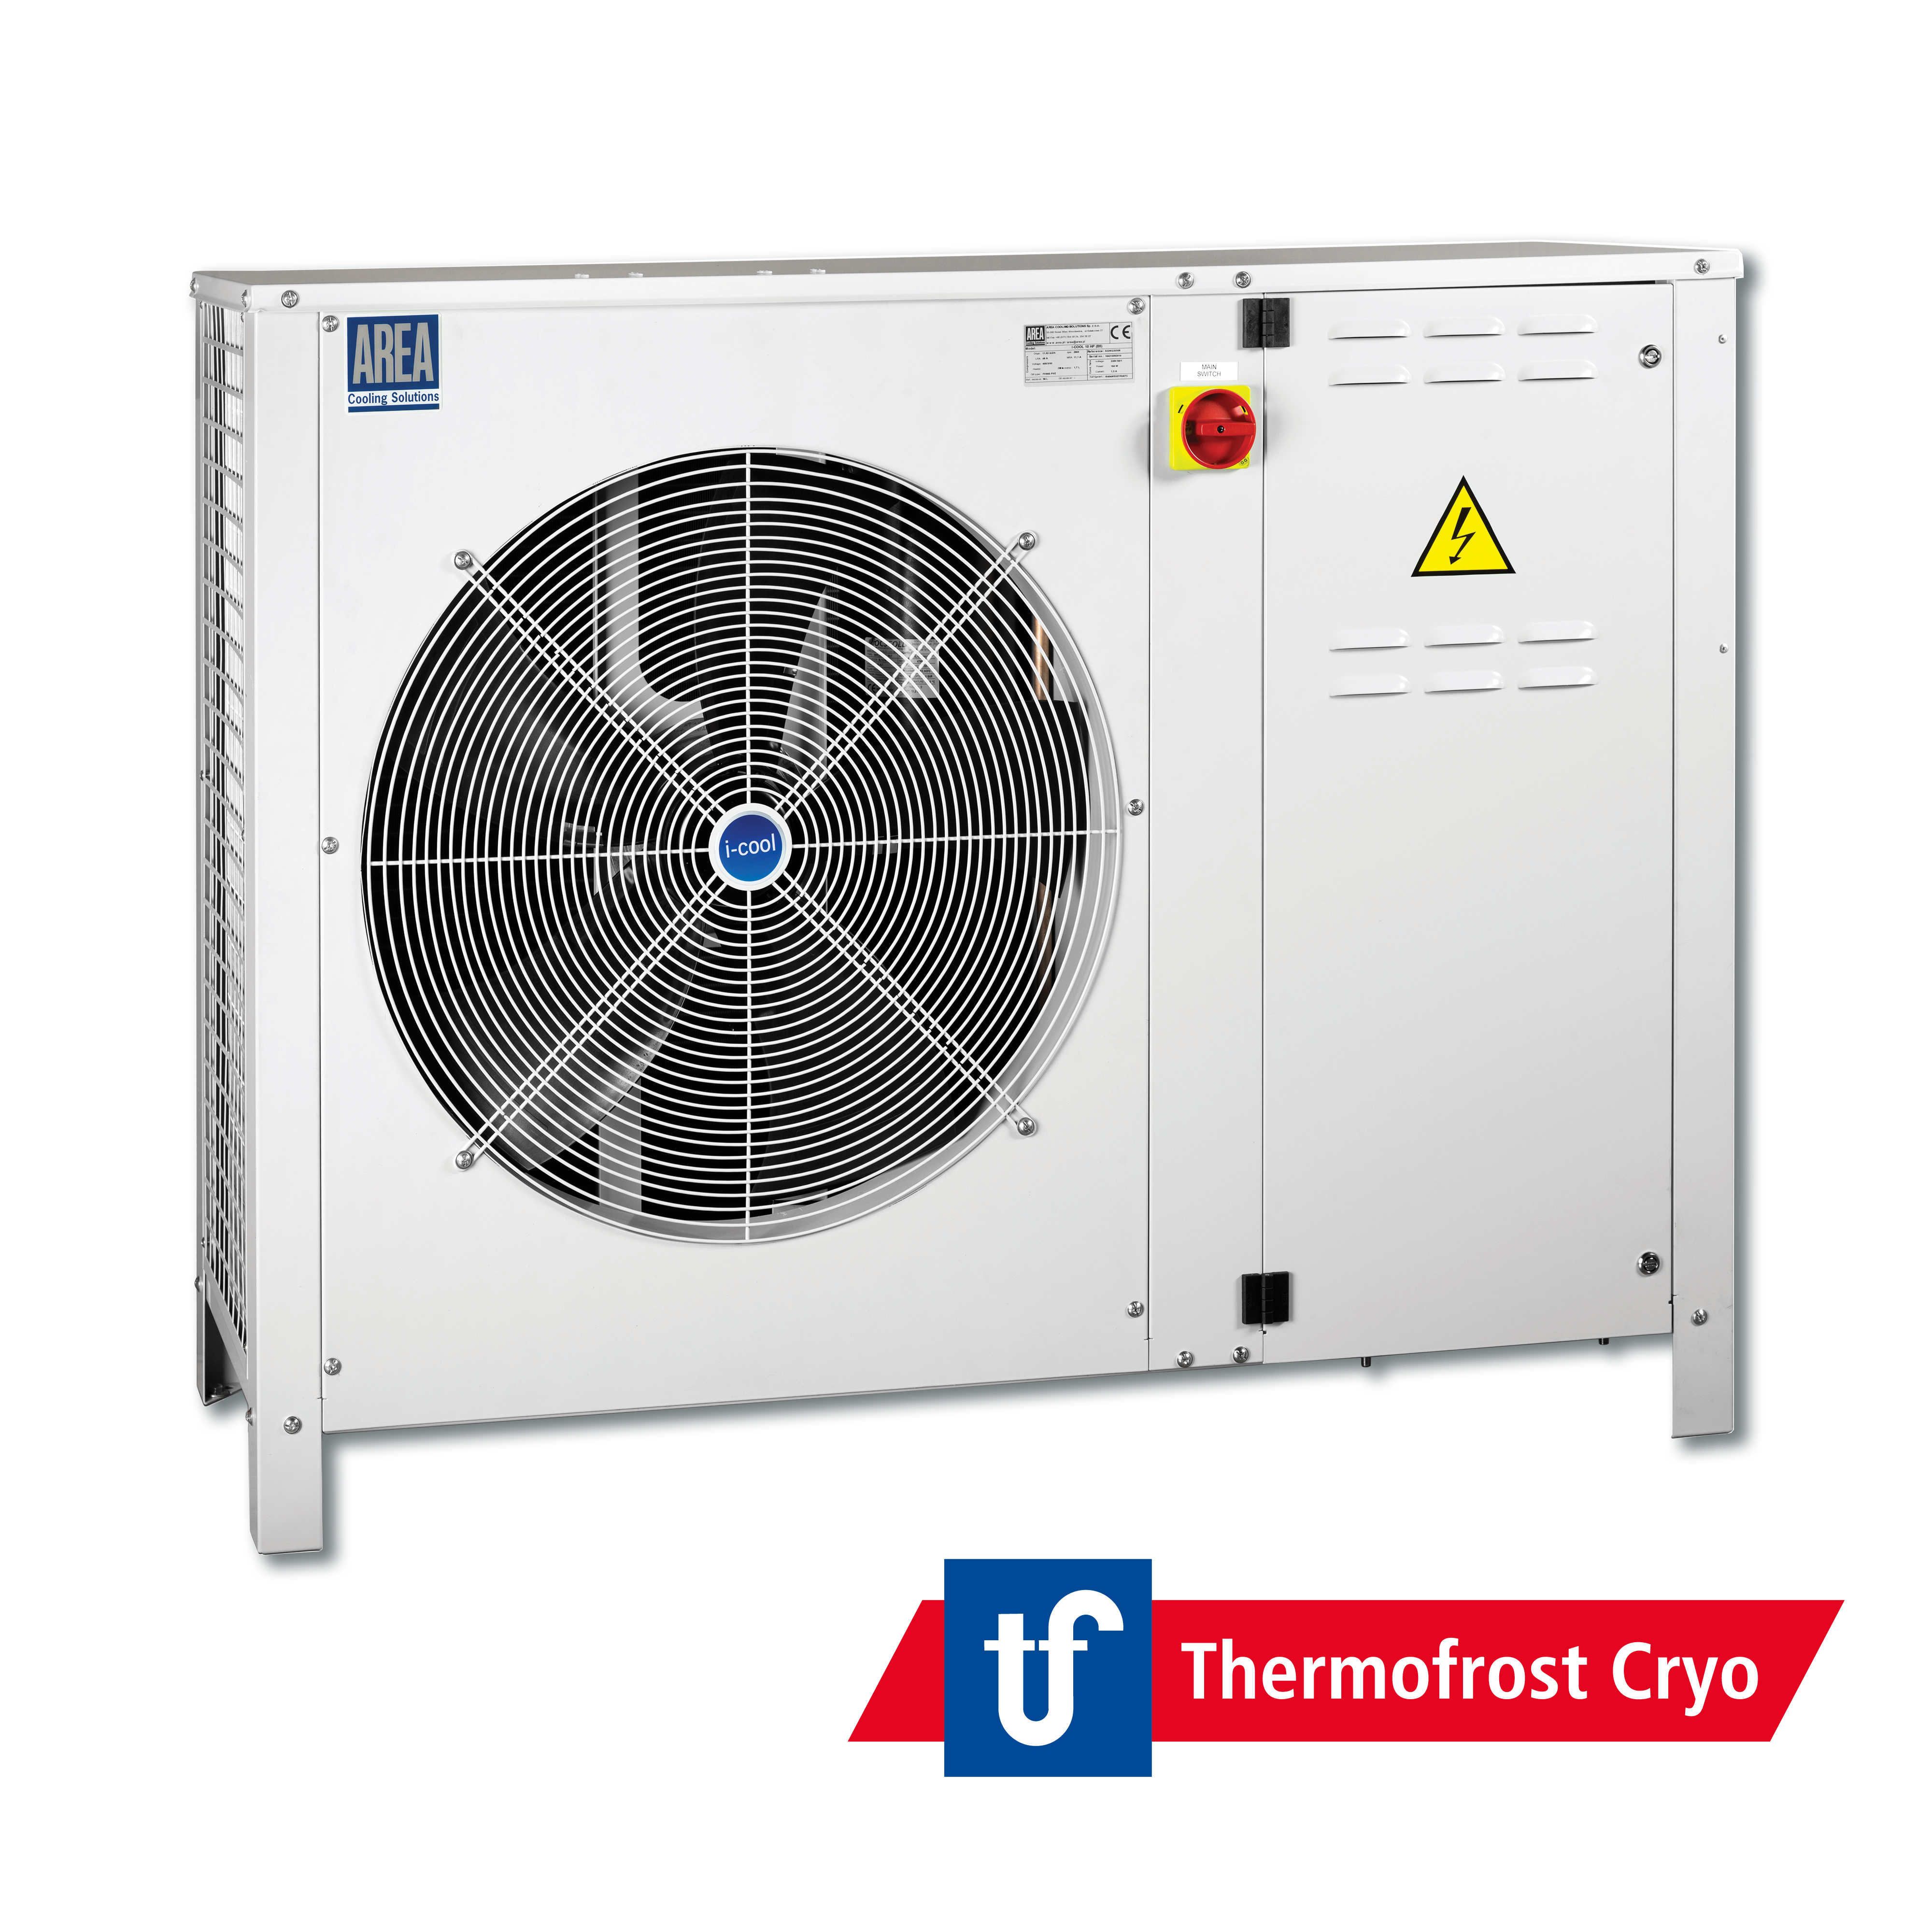 Thermofrost Cryo launches the Icool